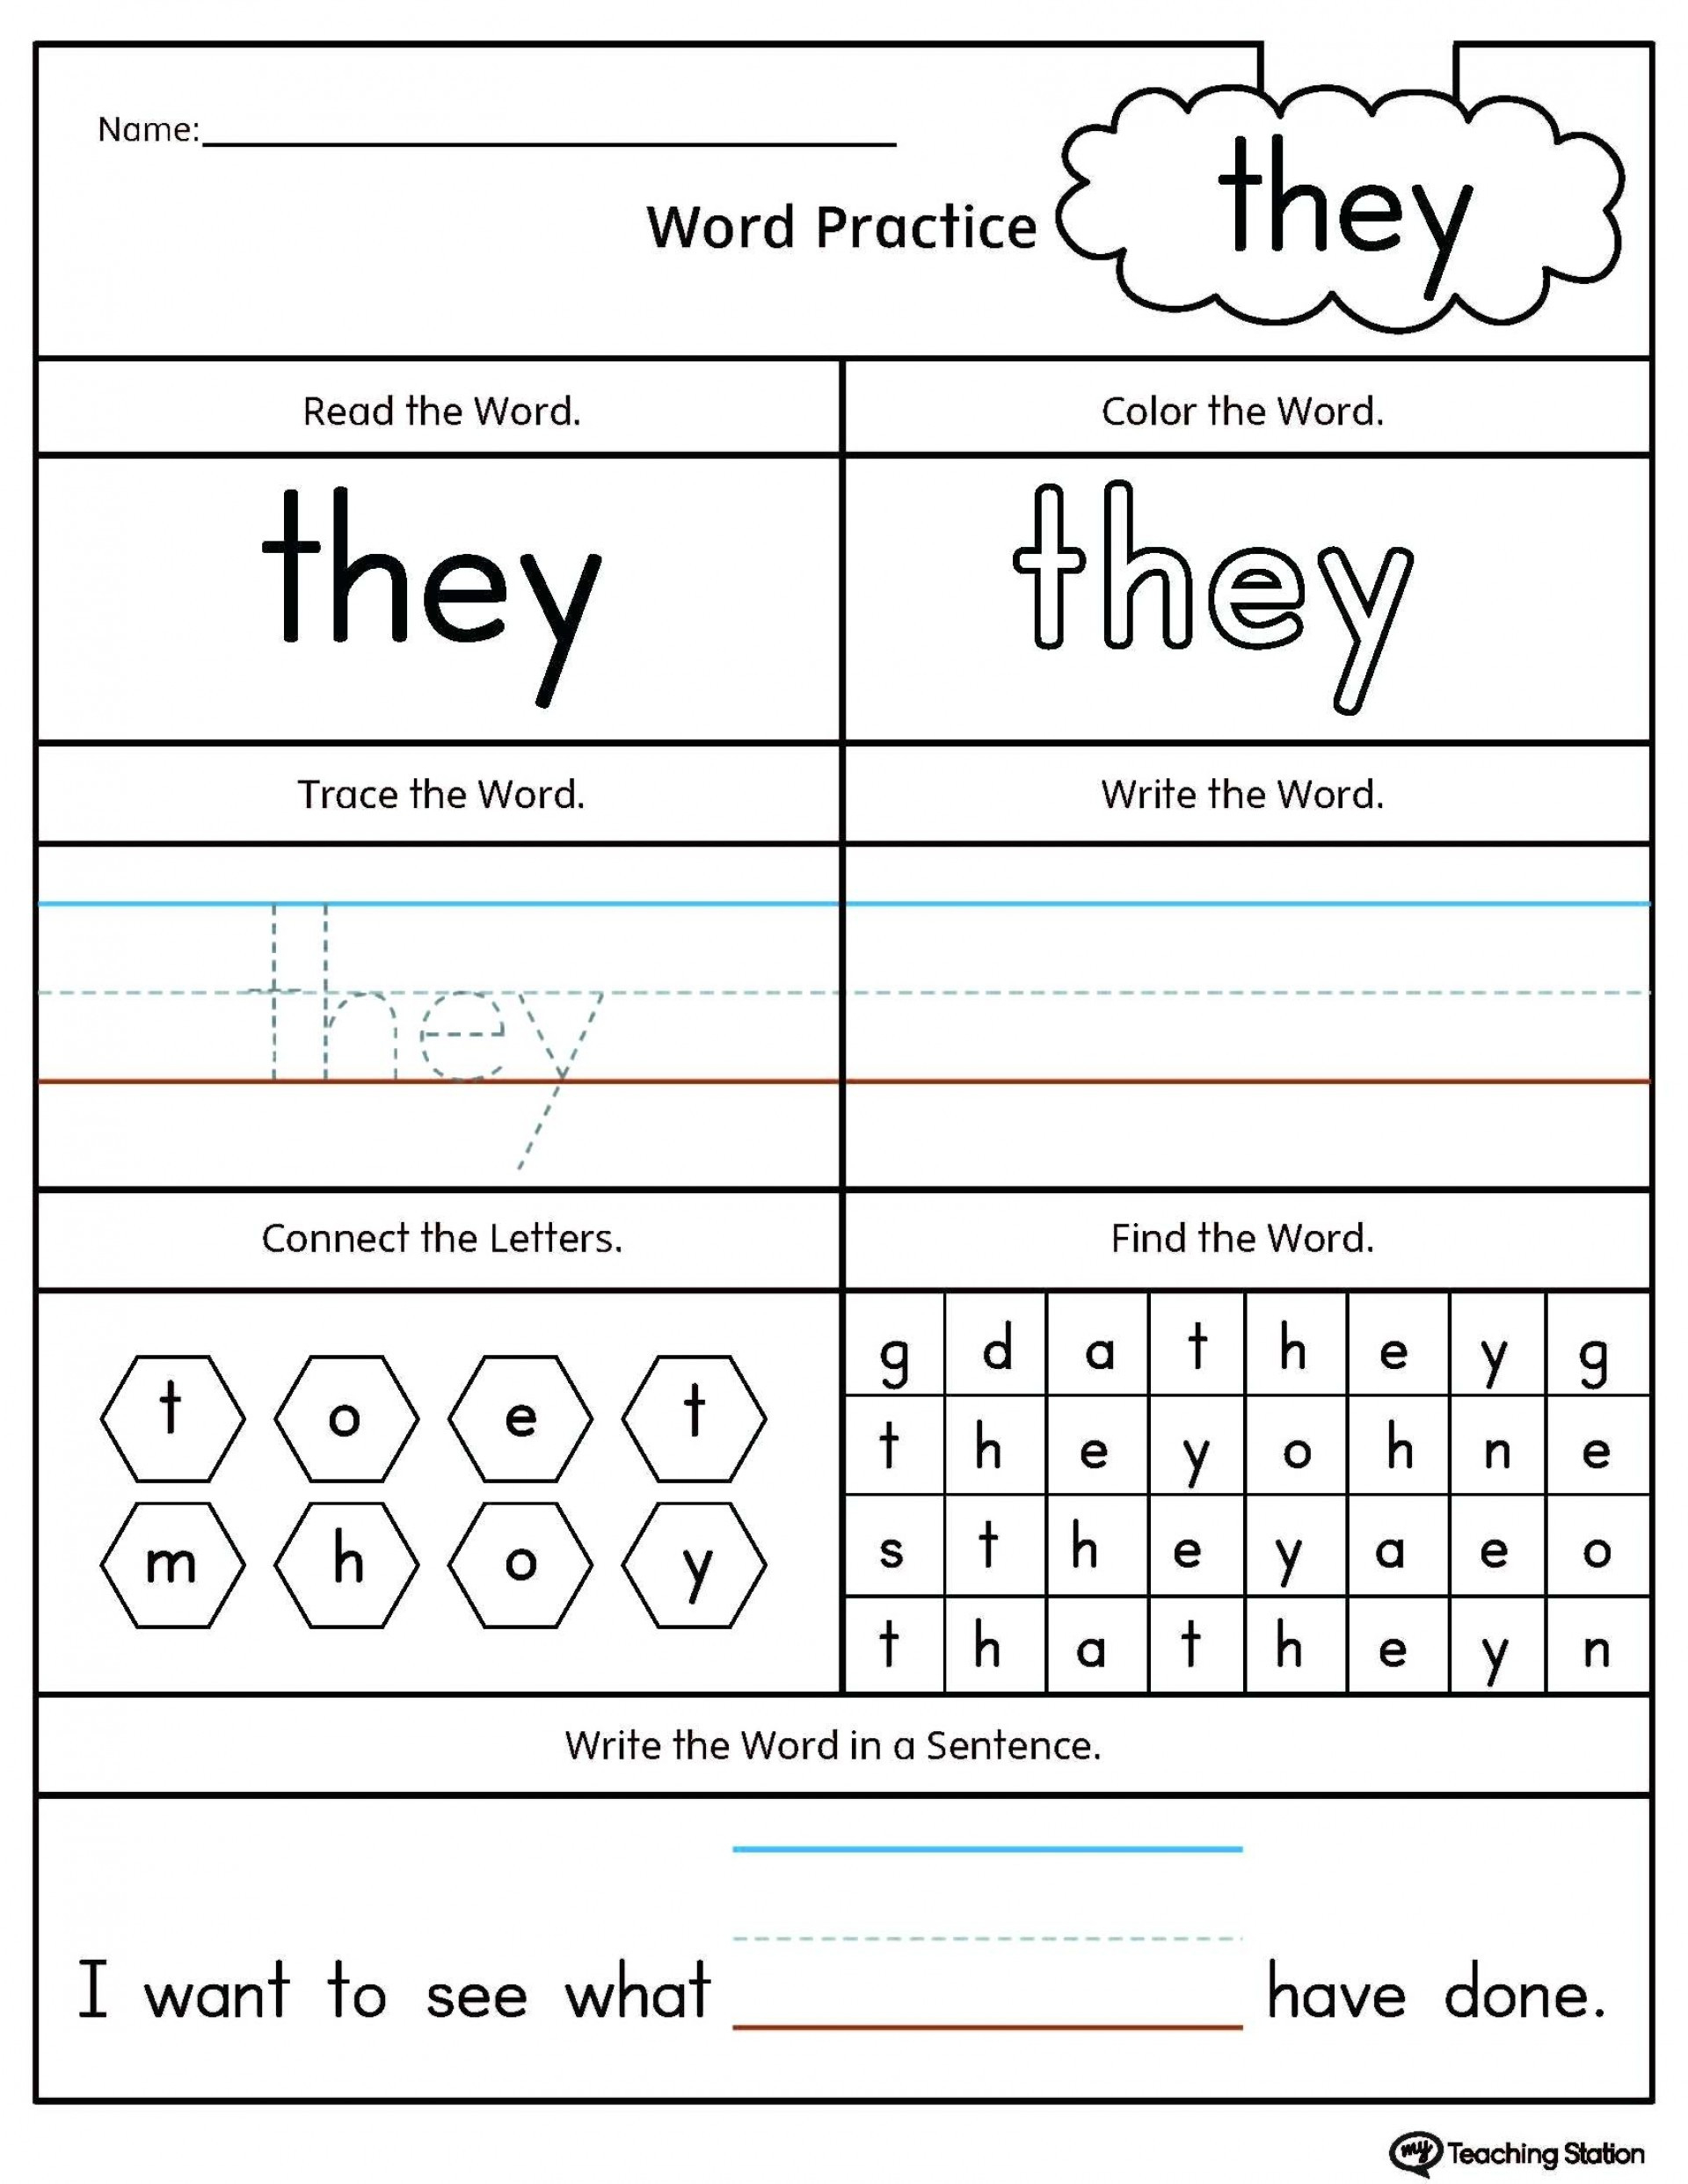 all dolch sight words on one sheet